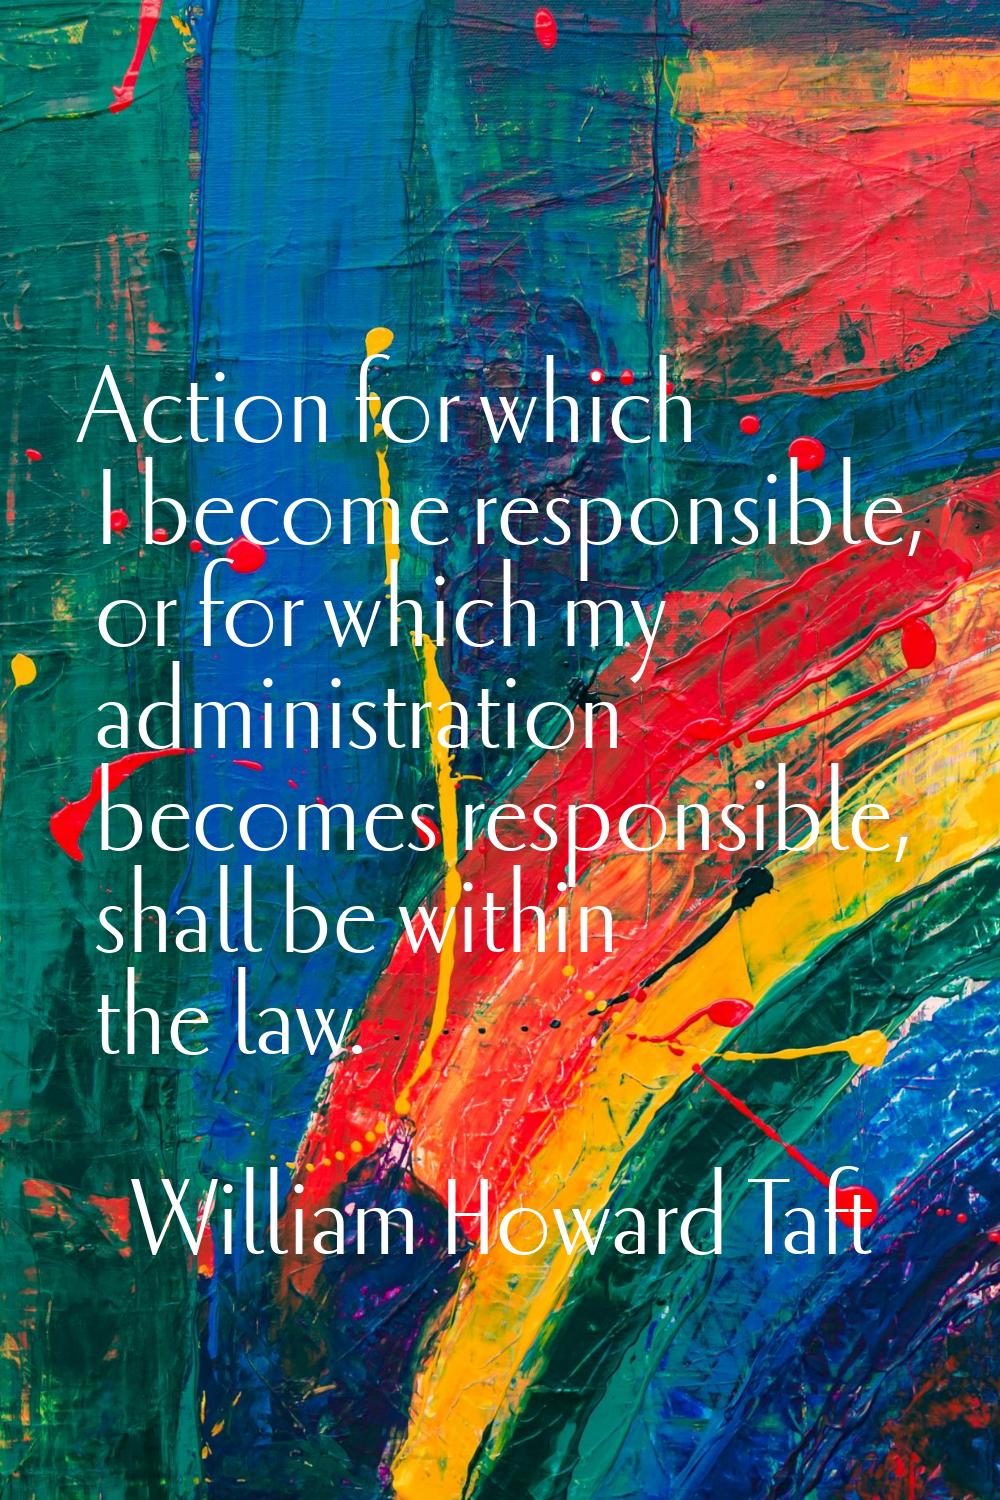 Action for which I become responsible, or for which my administration becomes responsible, shall be